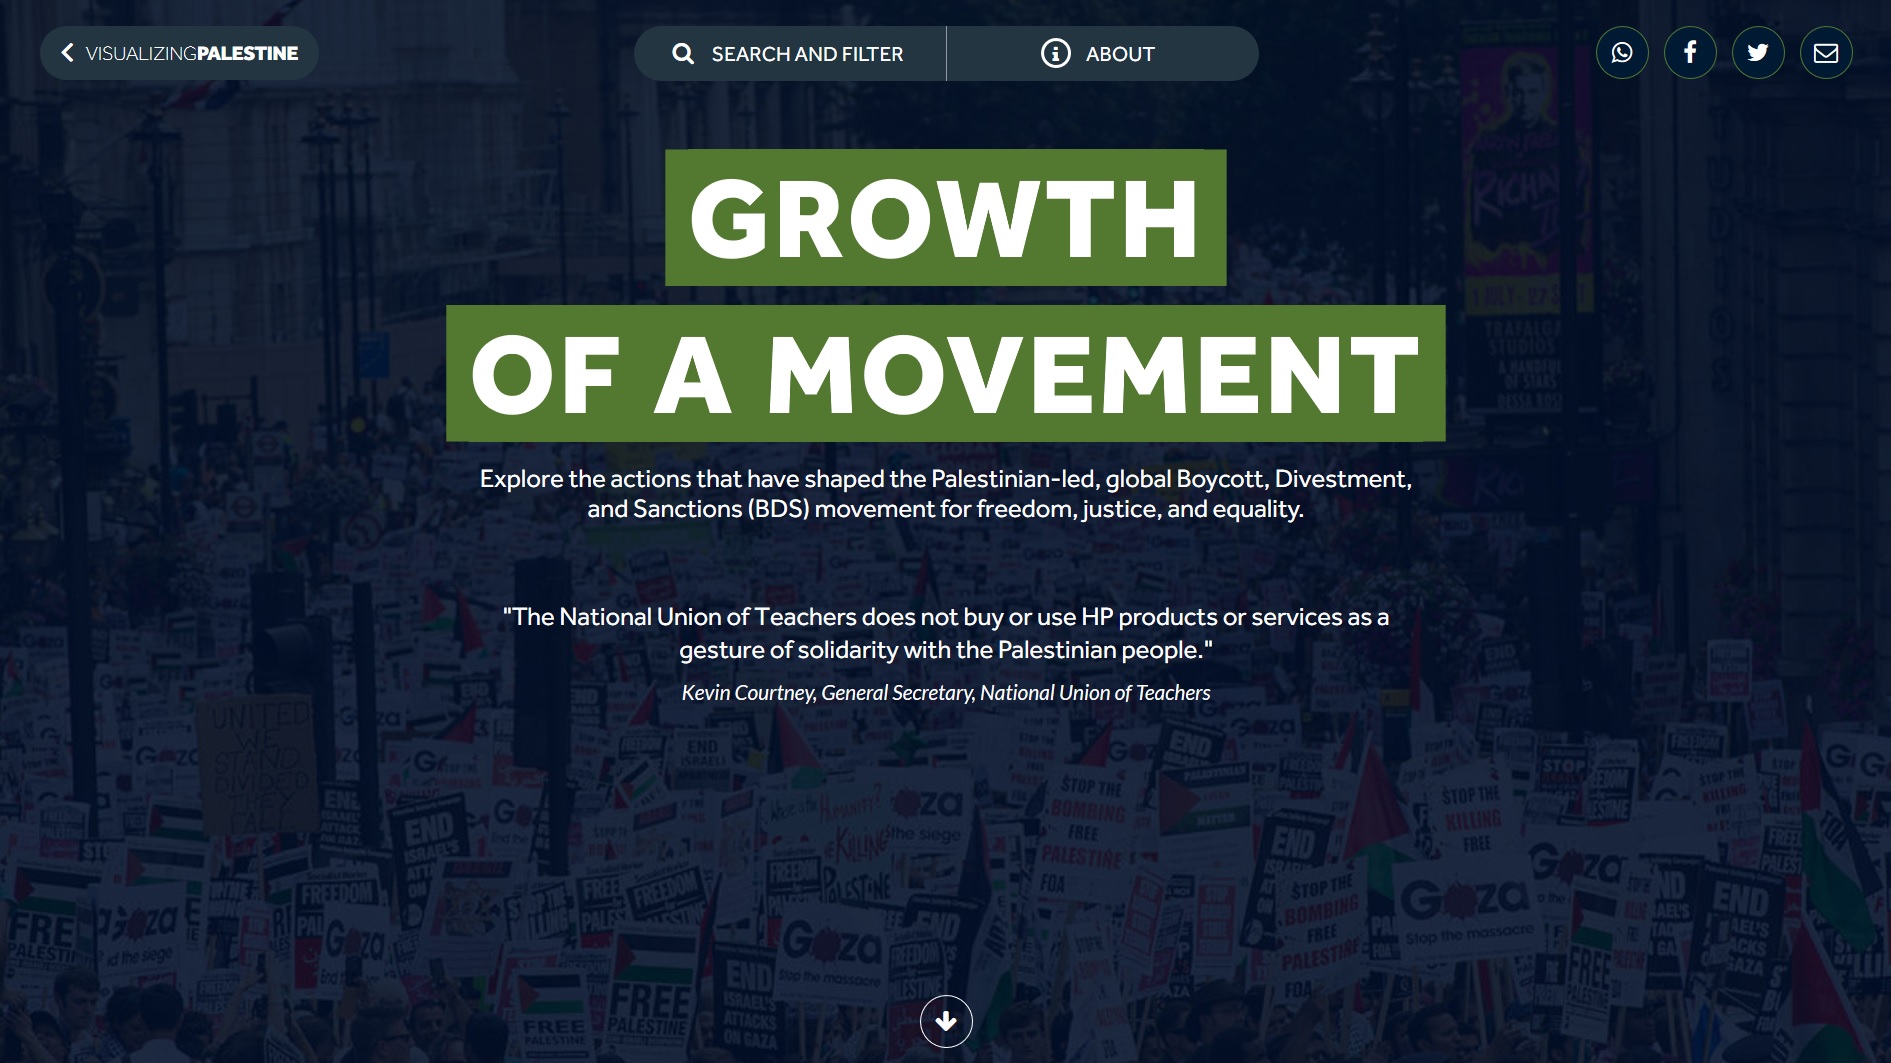 Growth of a Movement